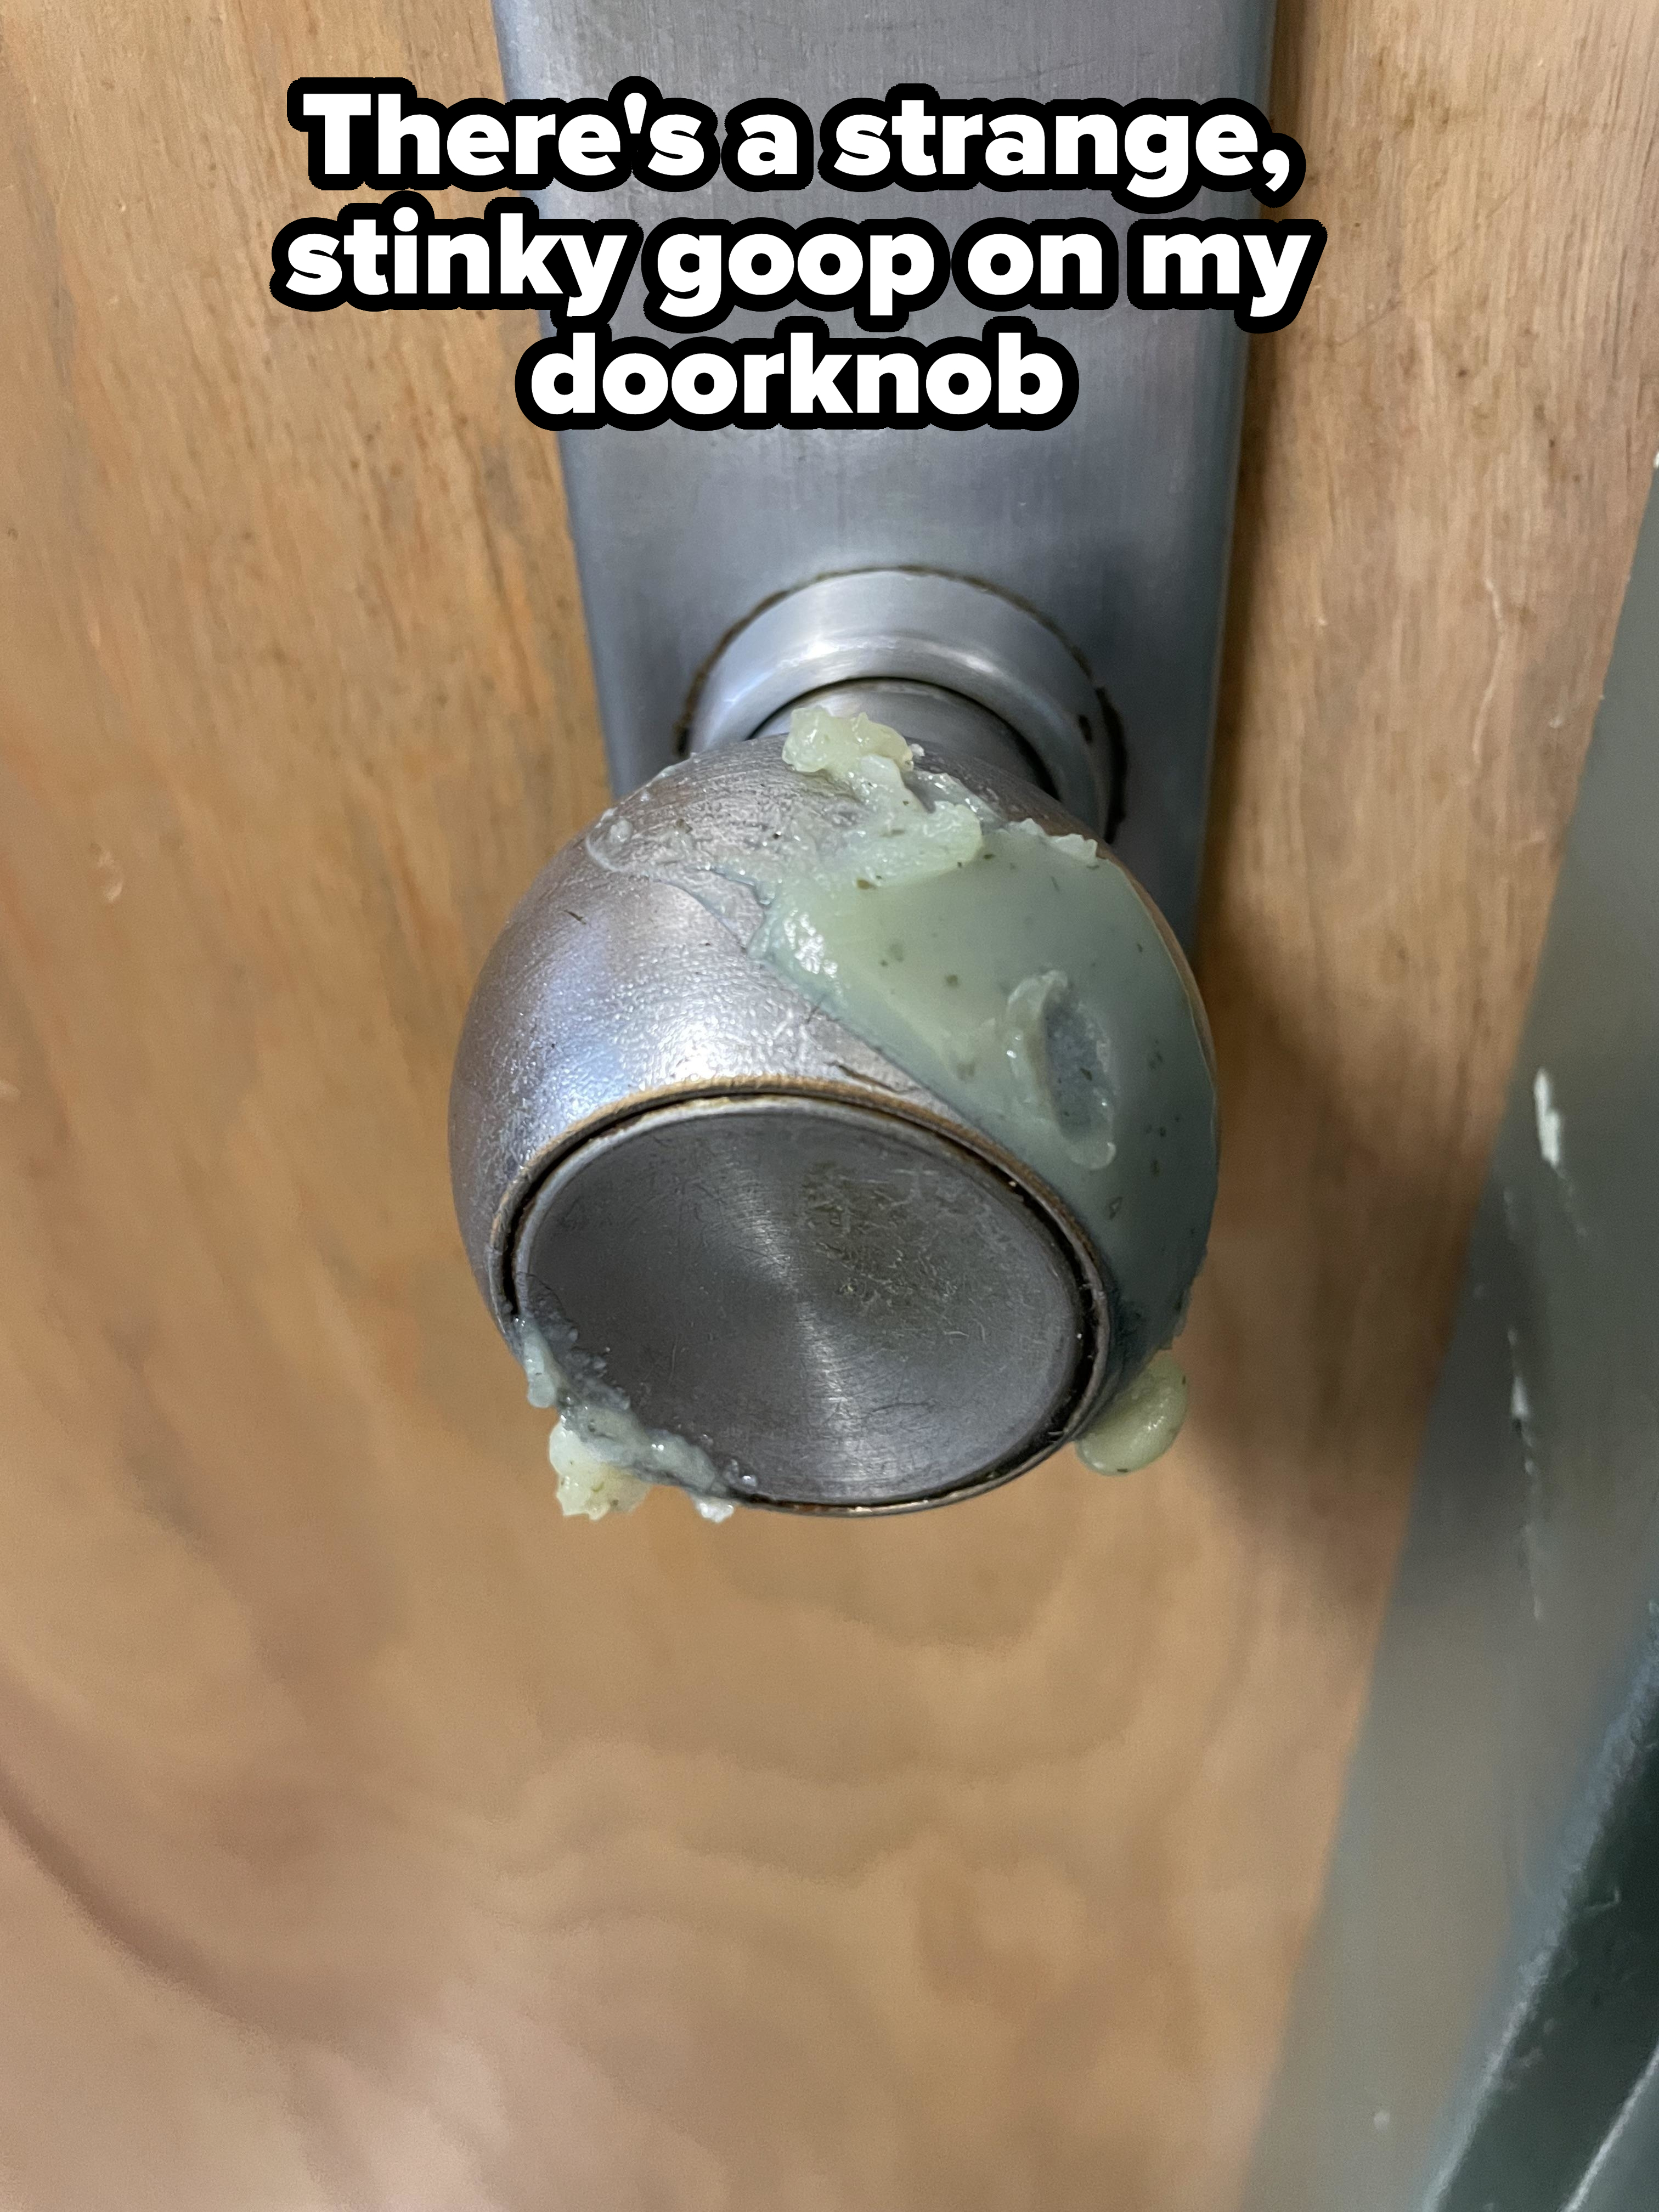 A doorknob with a sticky green substance on it